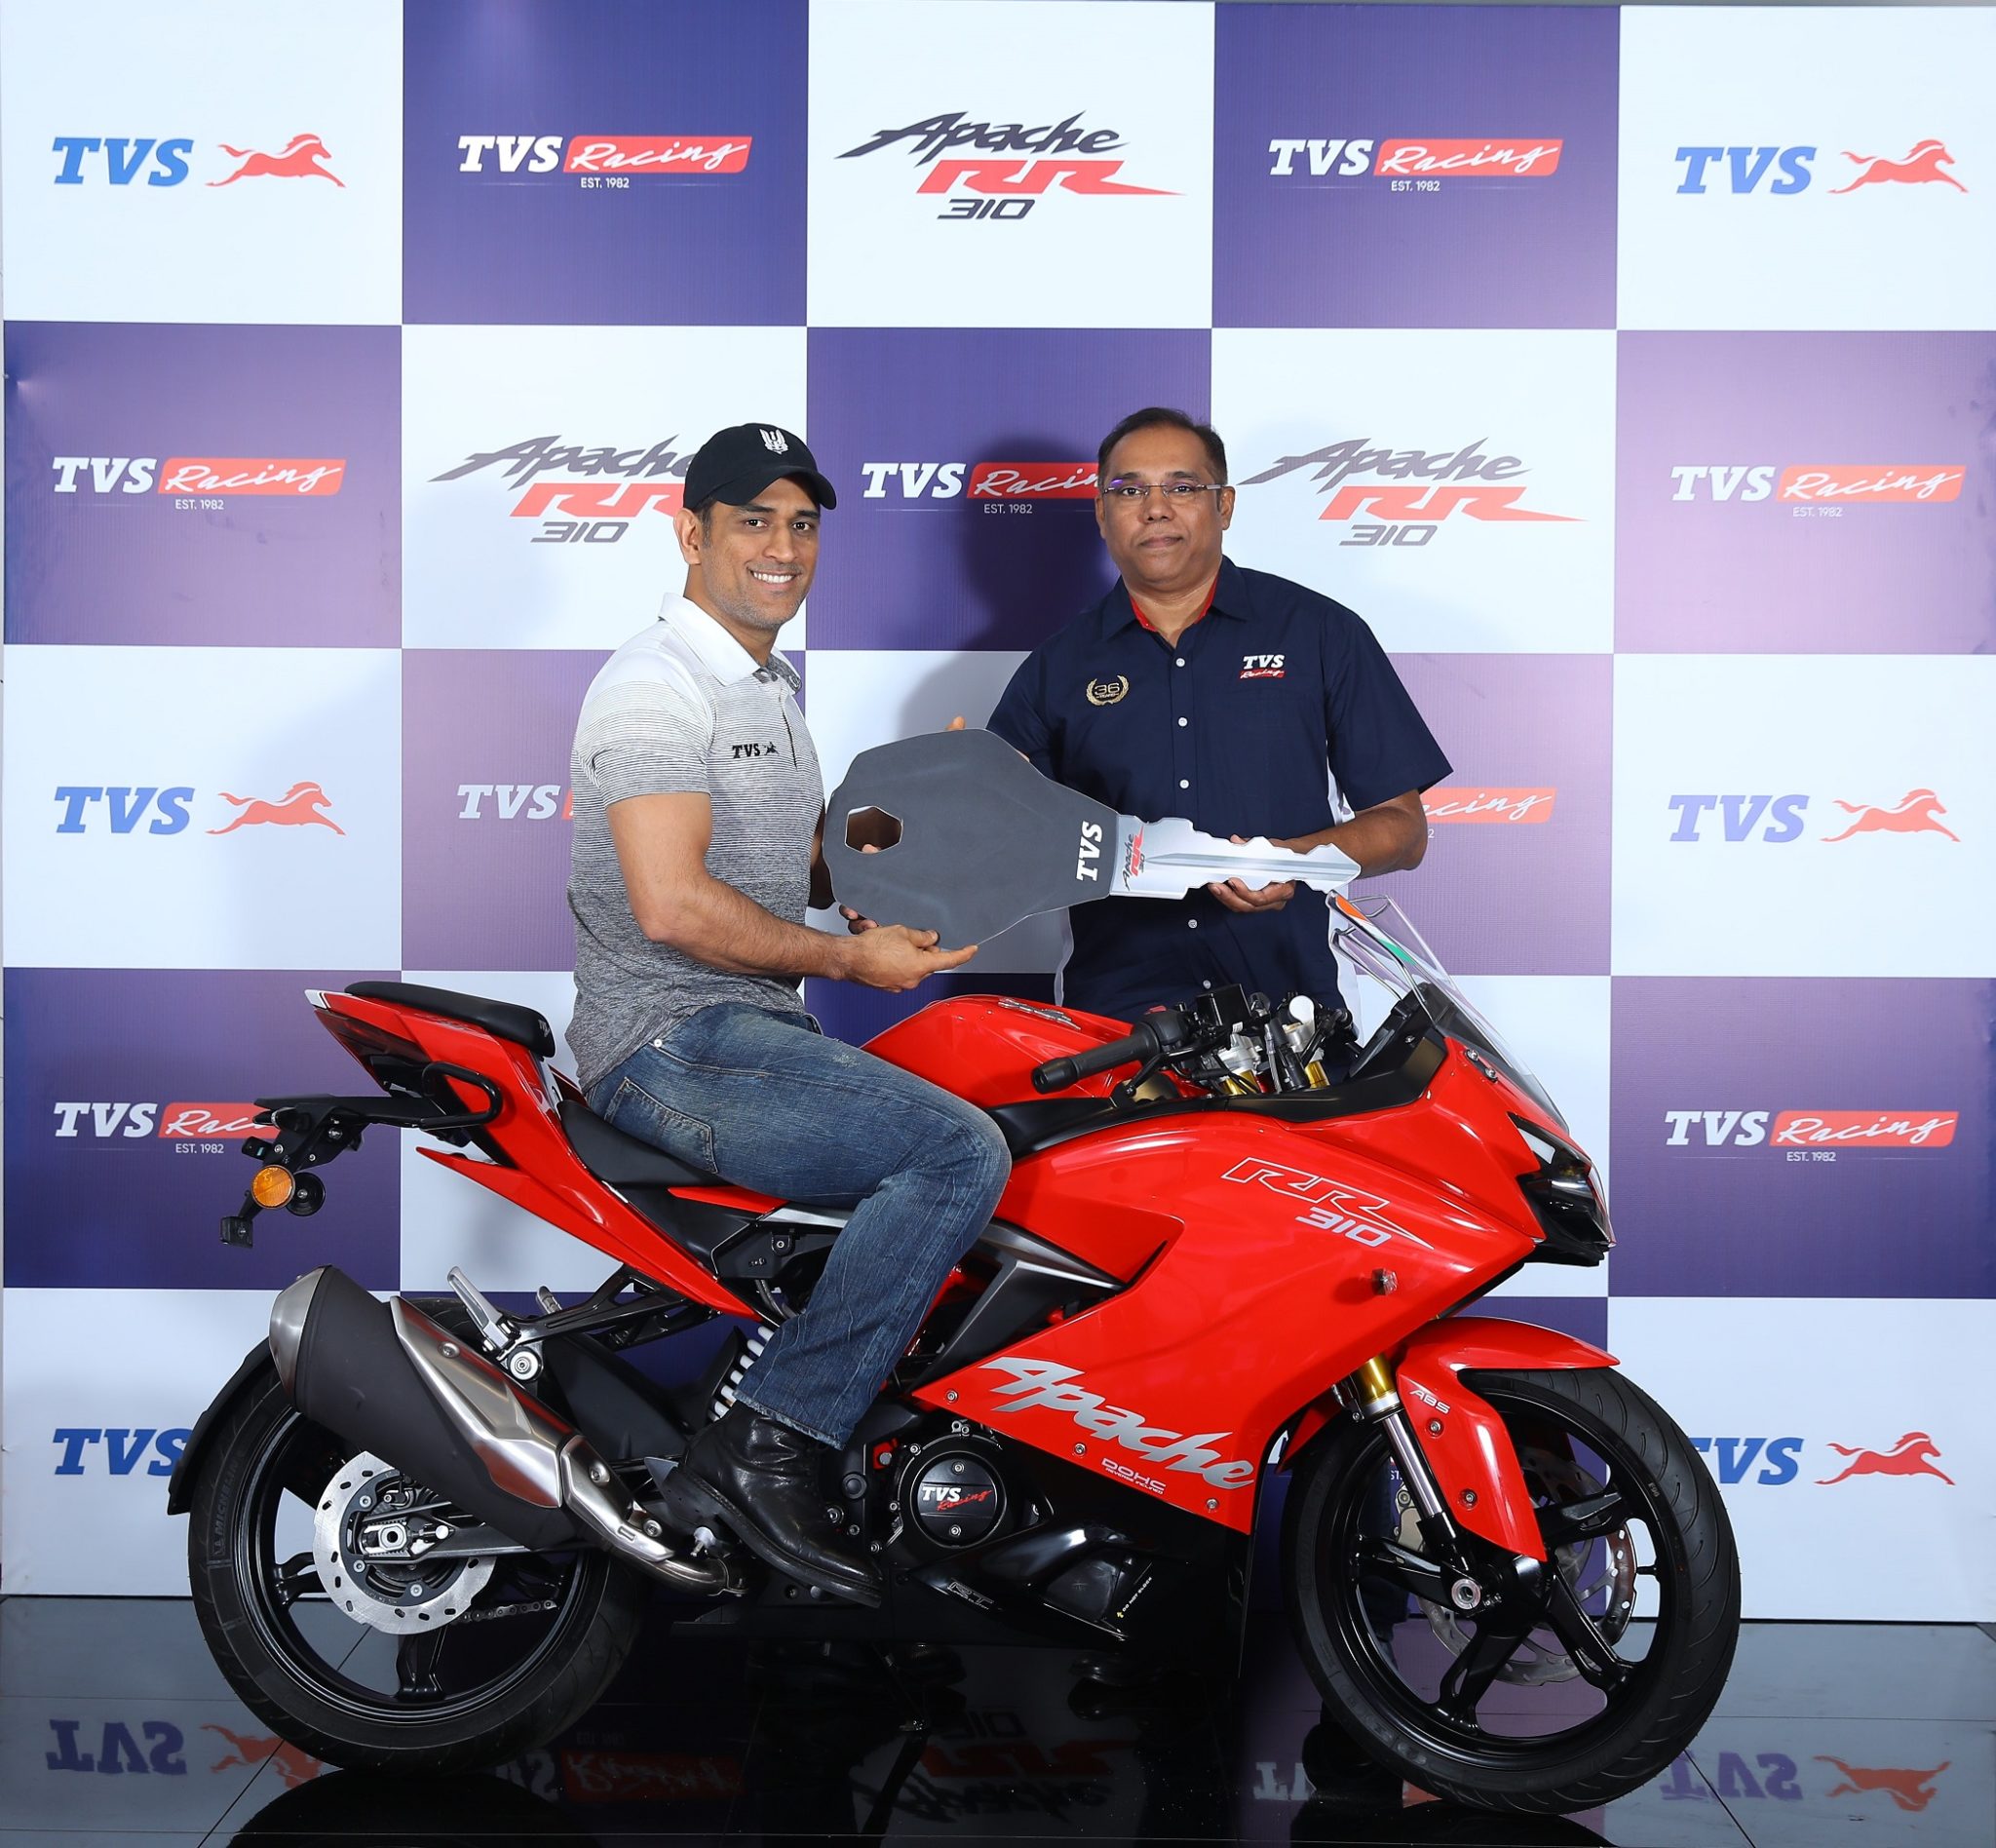 tvs-motor-company-launches-tvs-apache-rr-310-with-race-tuned-rt-slipper-clutch-technology